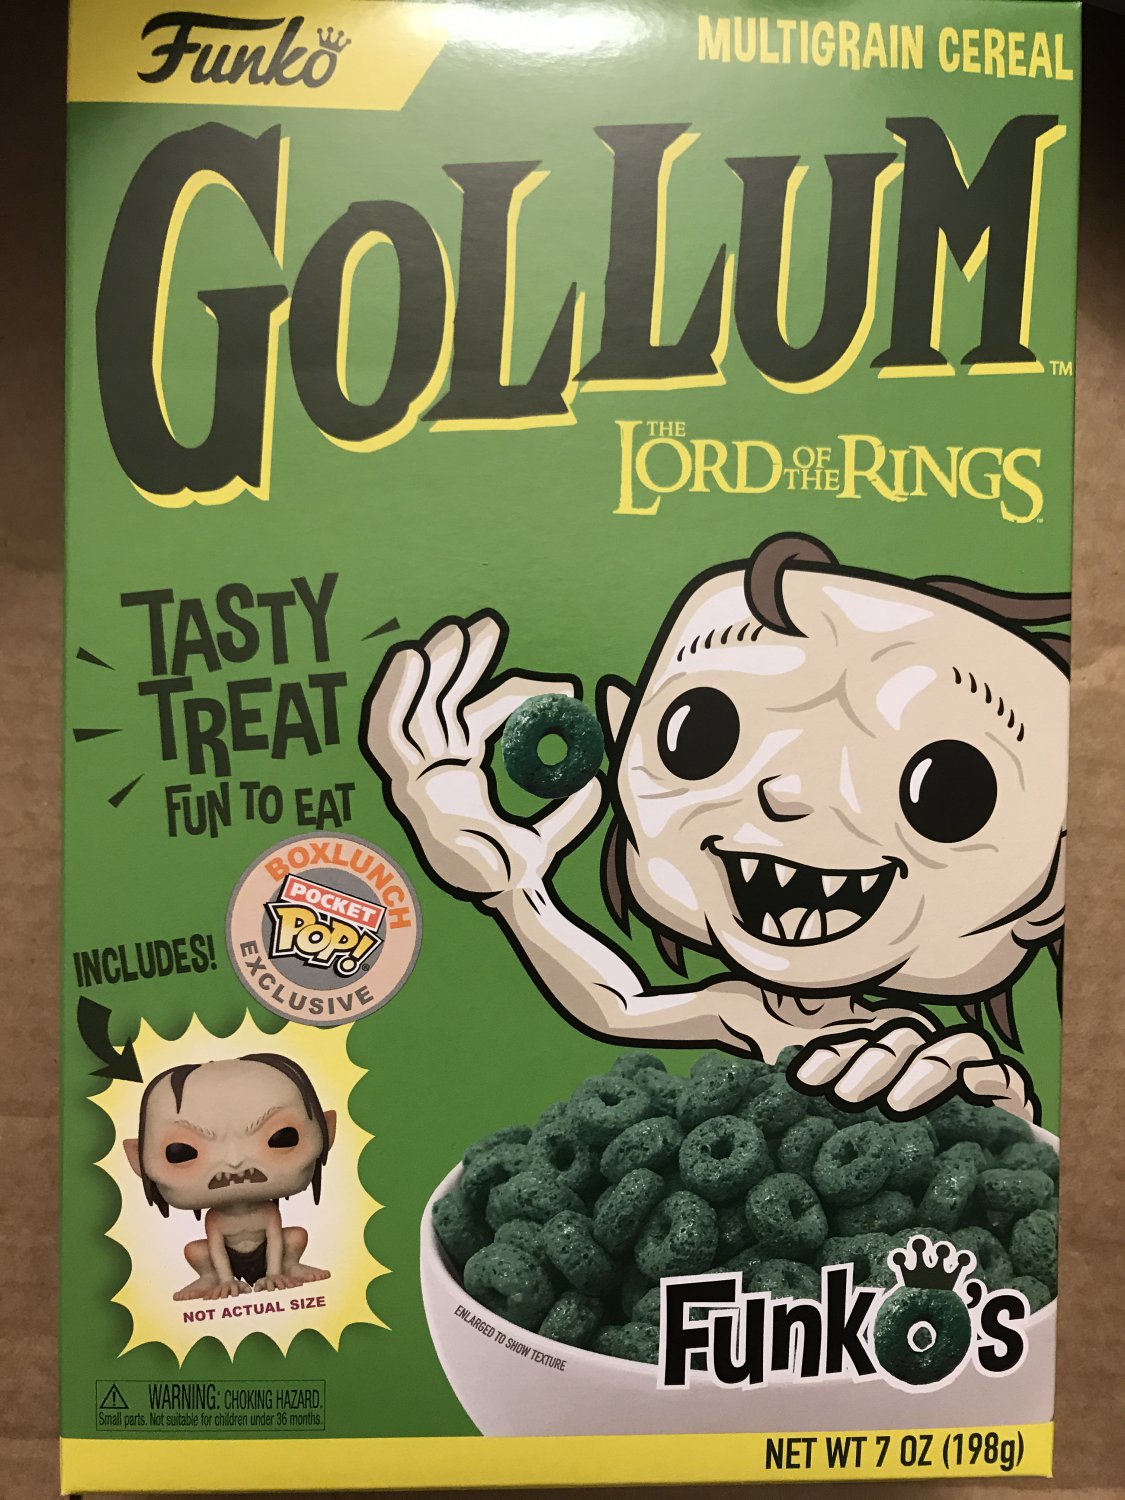 SDCC 2018 BoxLunch Exclusive Gollum Cereal